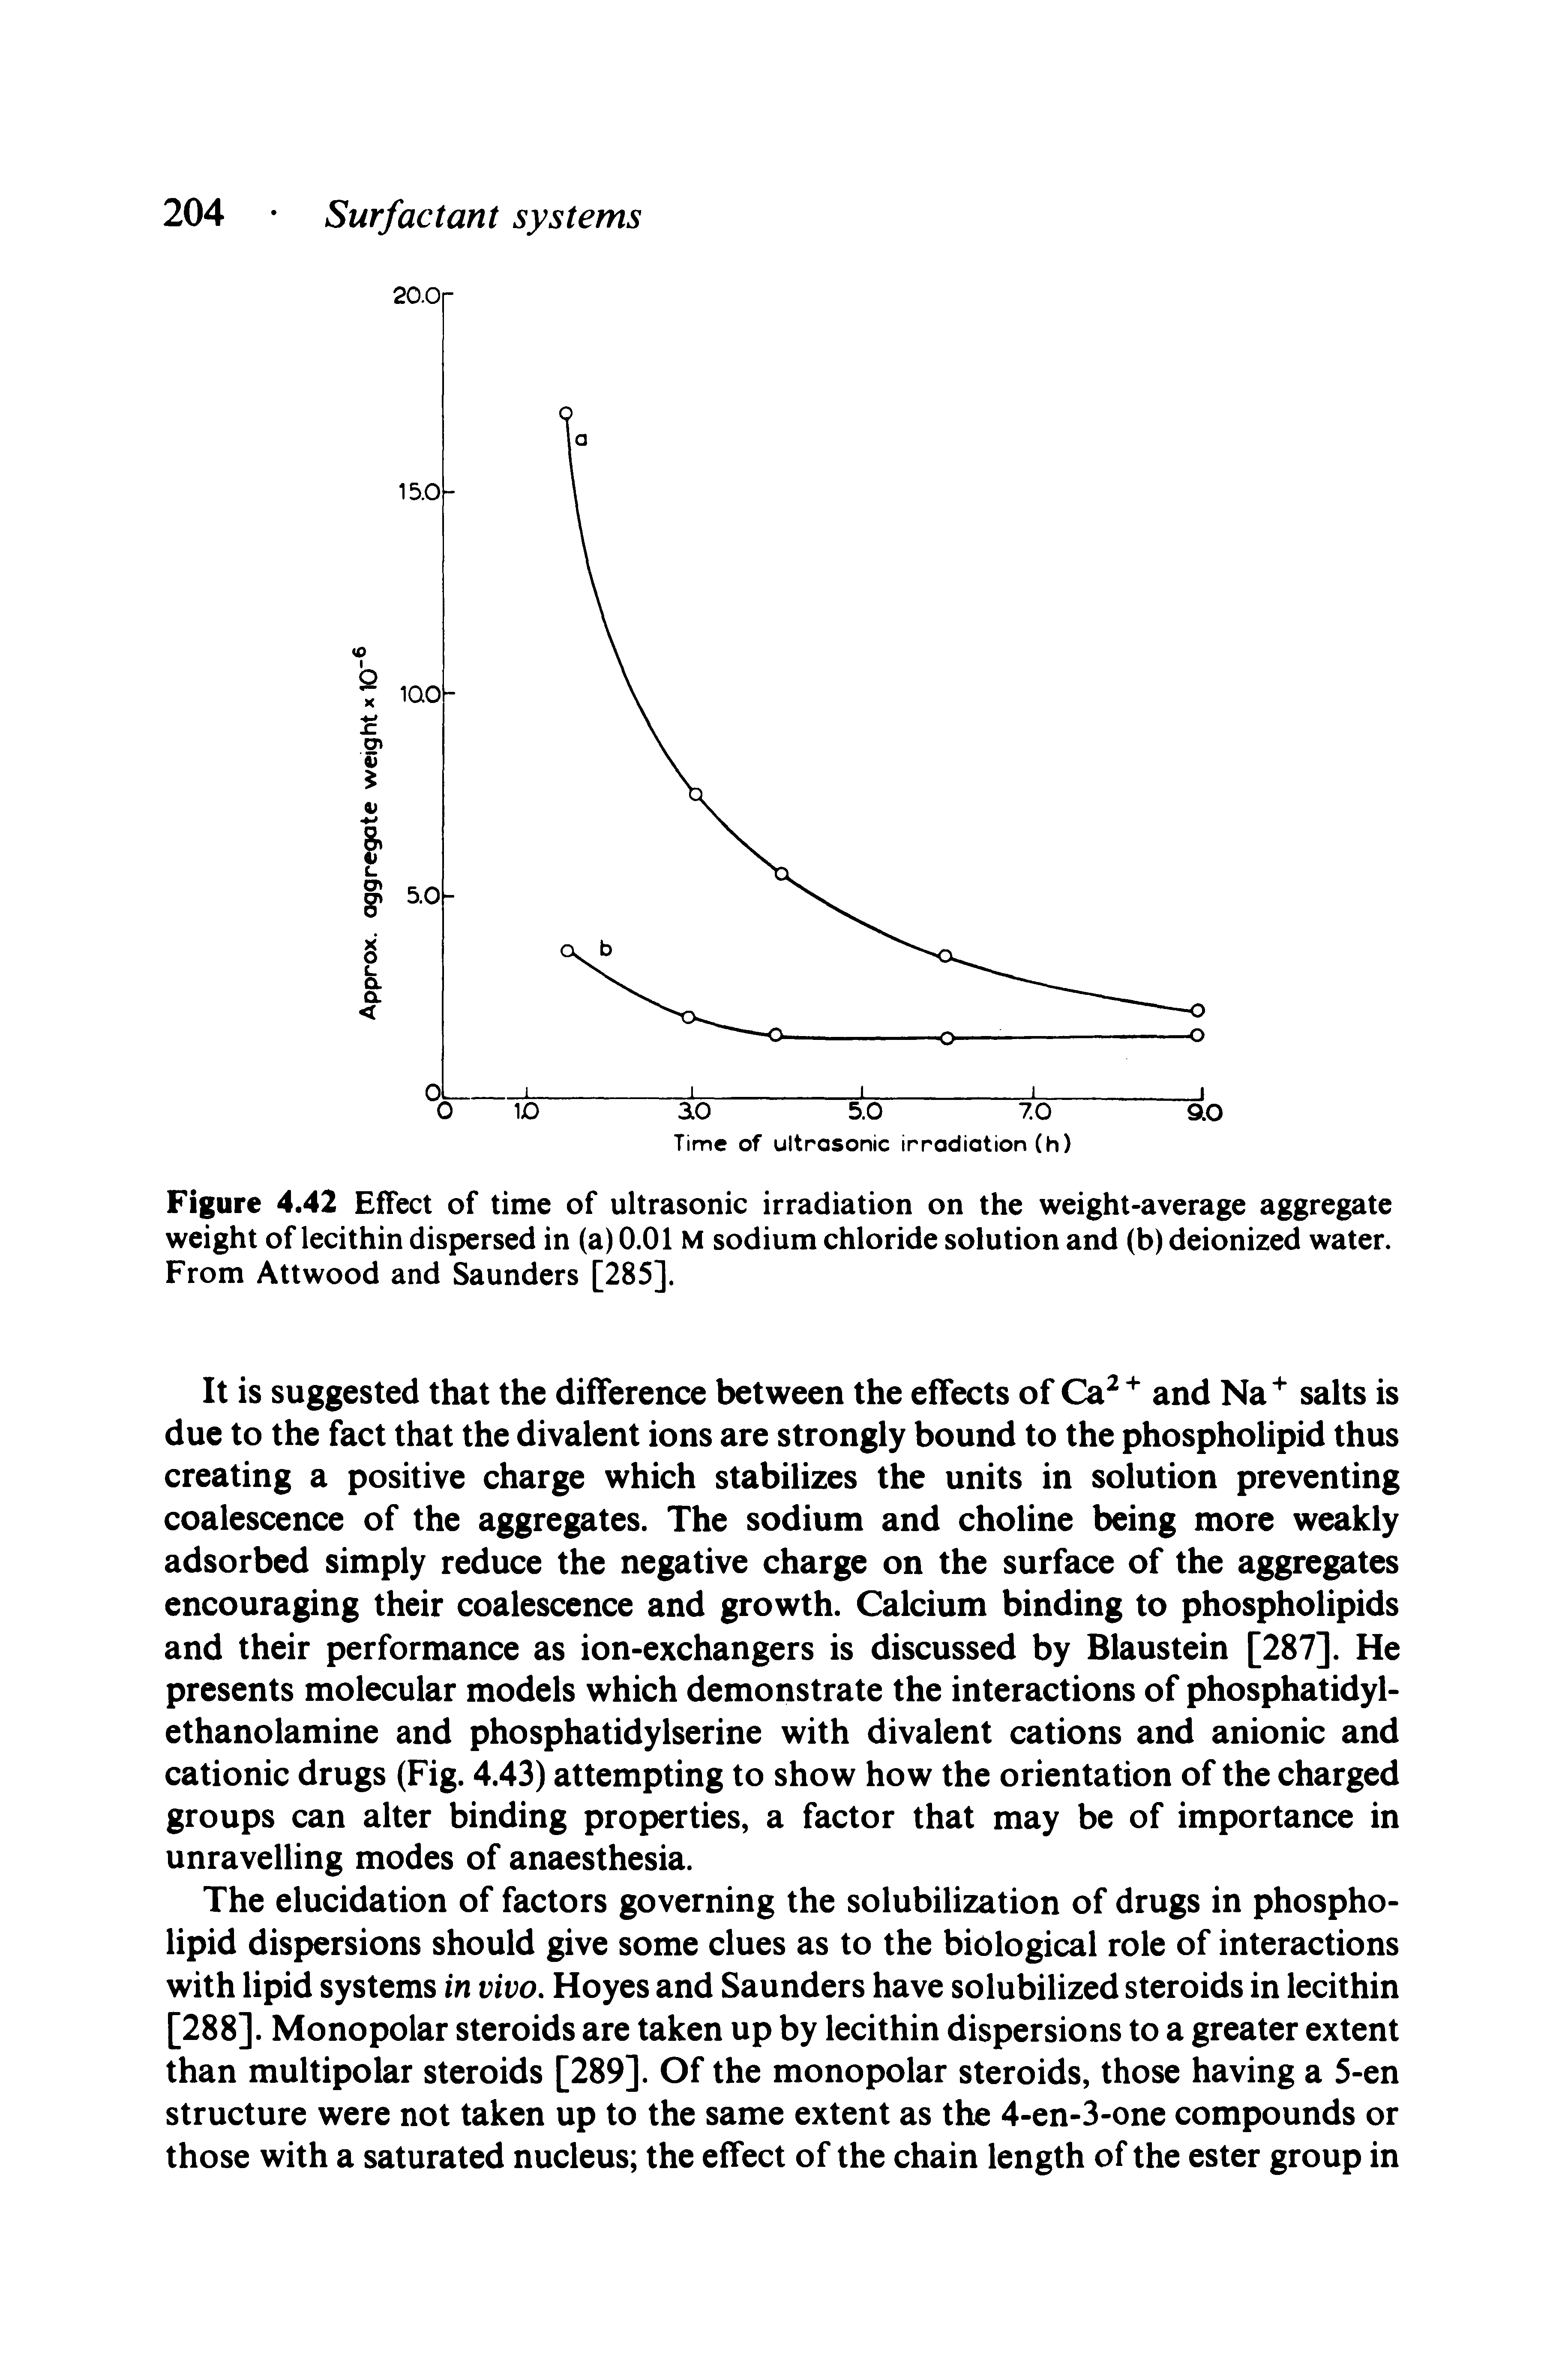 Figure 4.42 Effect of time of ultrasonic irradiation on the weight-average aggregate weight of lecithin dispersed in (a) 0.01 M sodium chloride solution and (b) deionized water. From Attwood and Saunders [285].